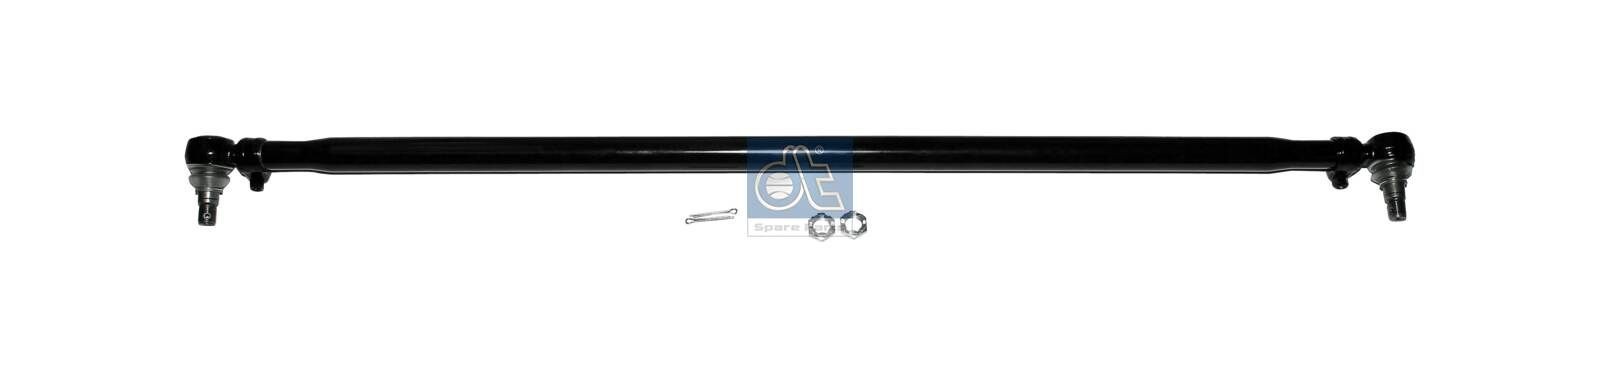 DT Spare Parts 7.30003 Rod Assembly 8163 773